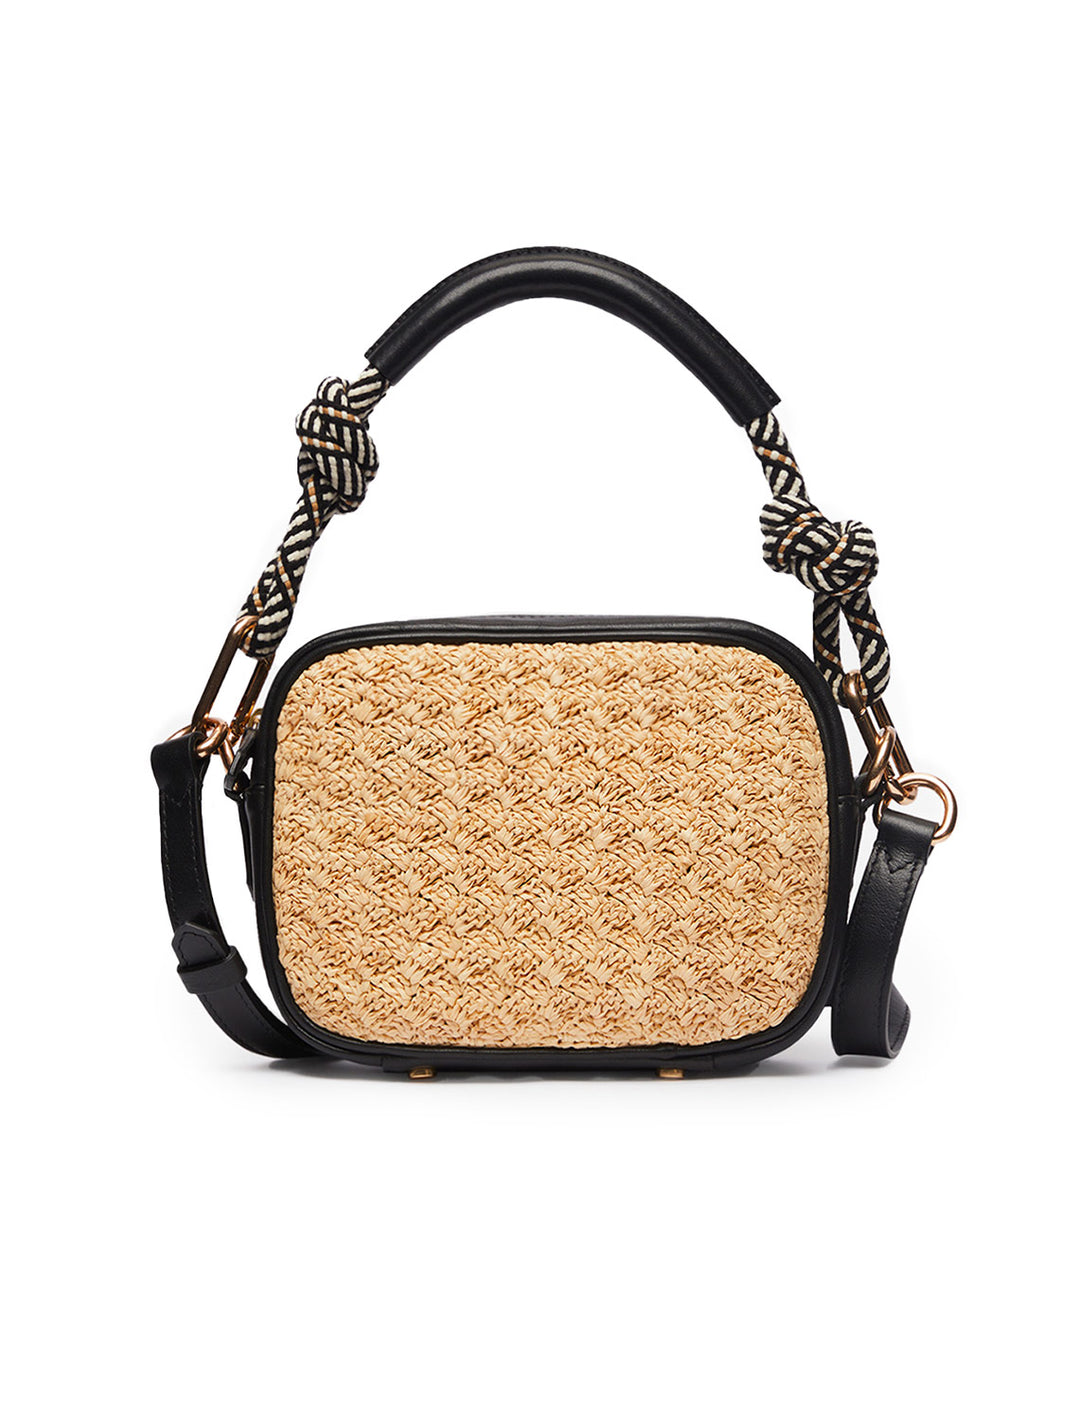 Front view of Vanessa Bruno's holly crossbody in noir.